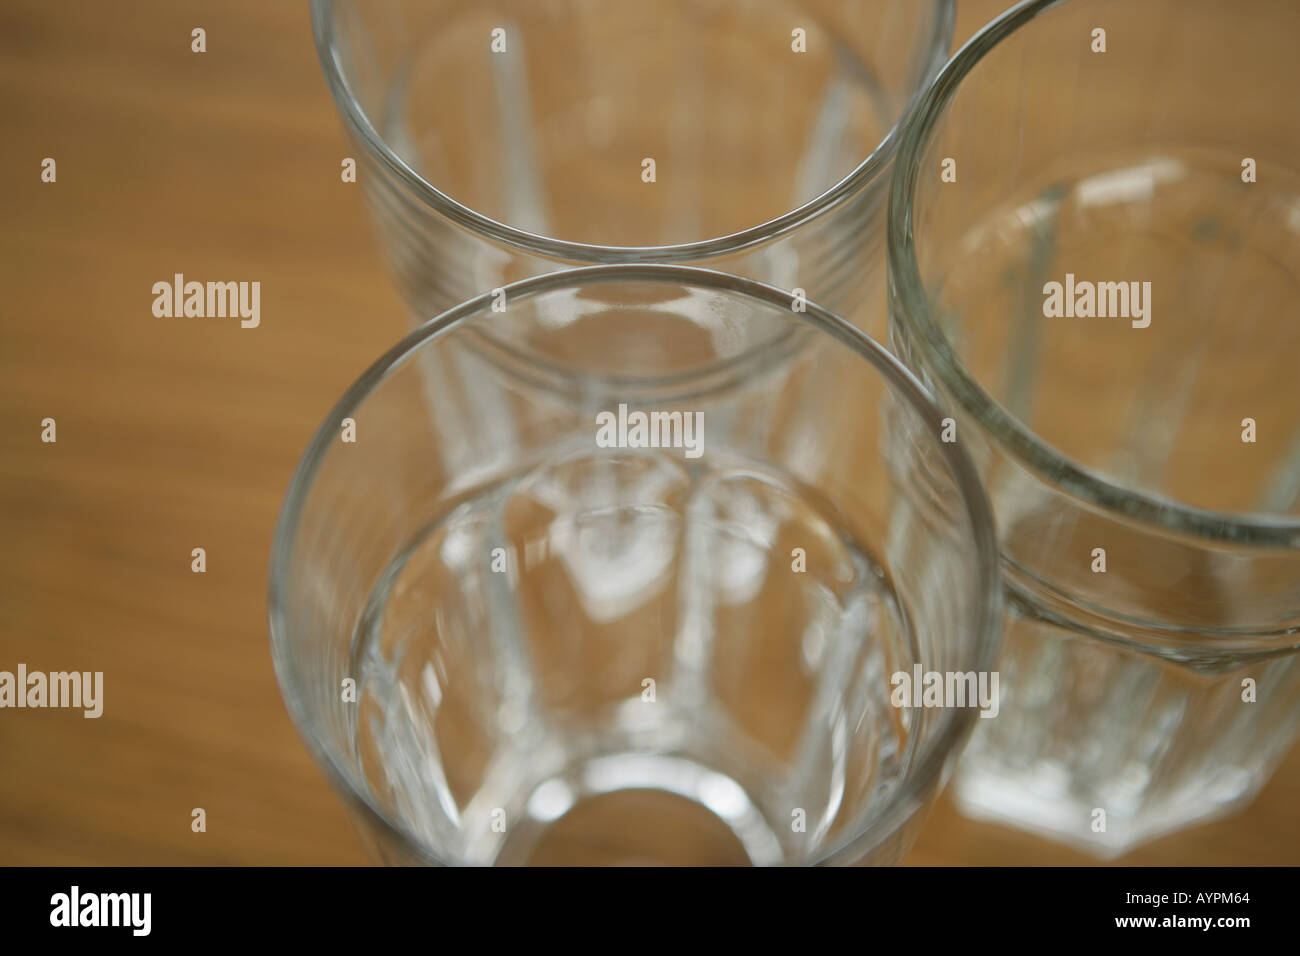 Three empty glasses kept on a table close to each other Stock Photo